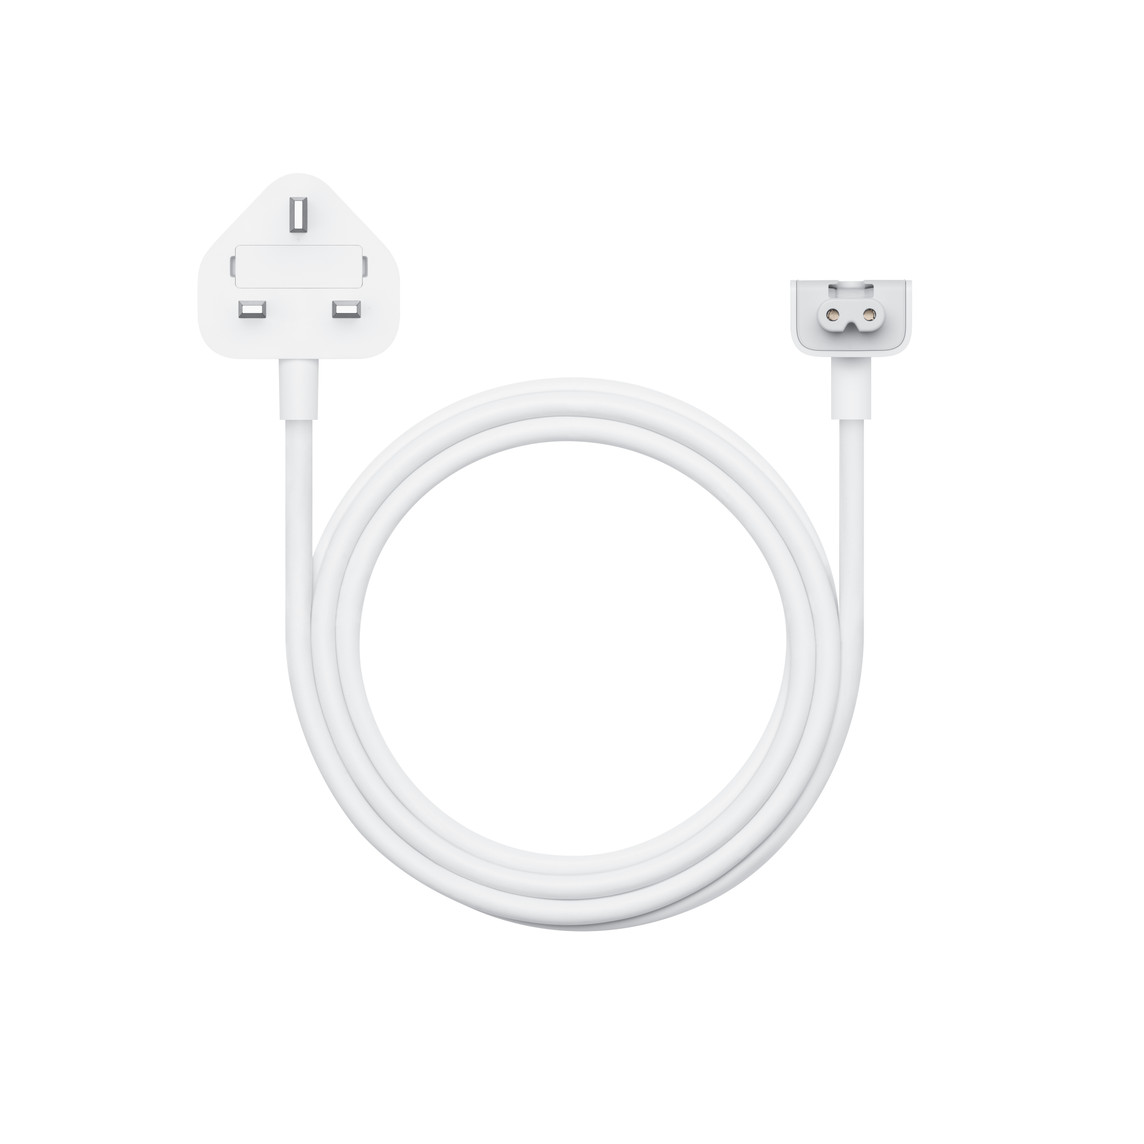 The 1.8-metre Power Adapter Extension Cable is an AC extension lead that provides extra length for your Apple power adapter.